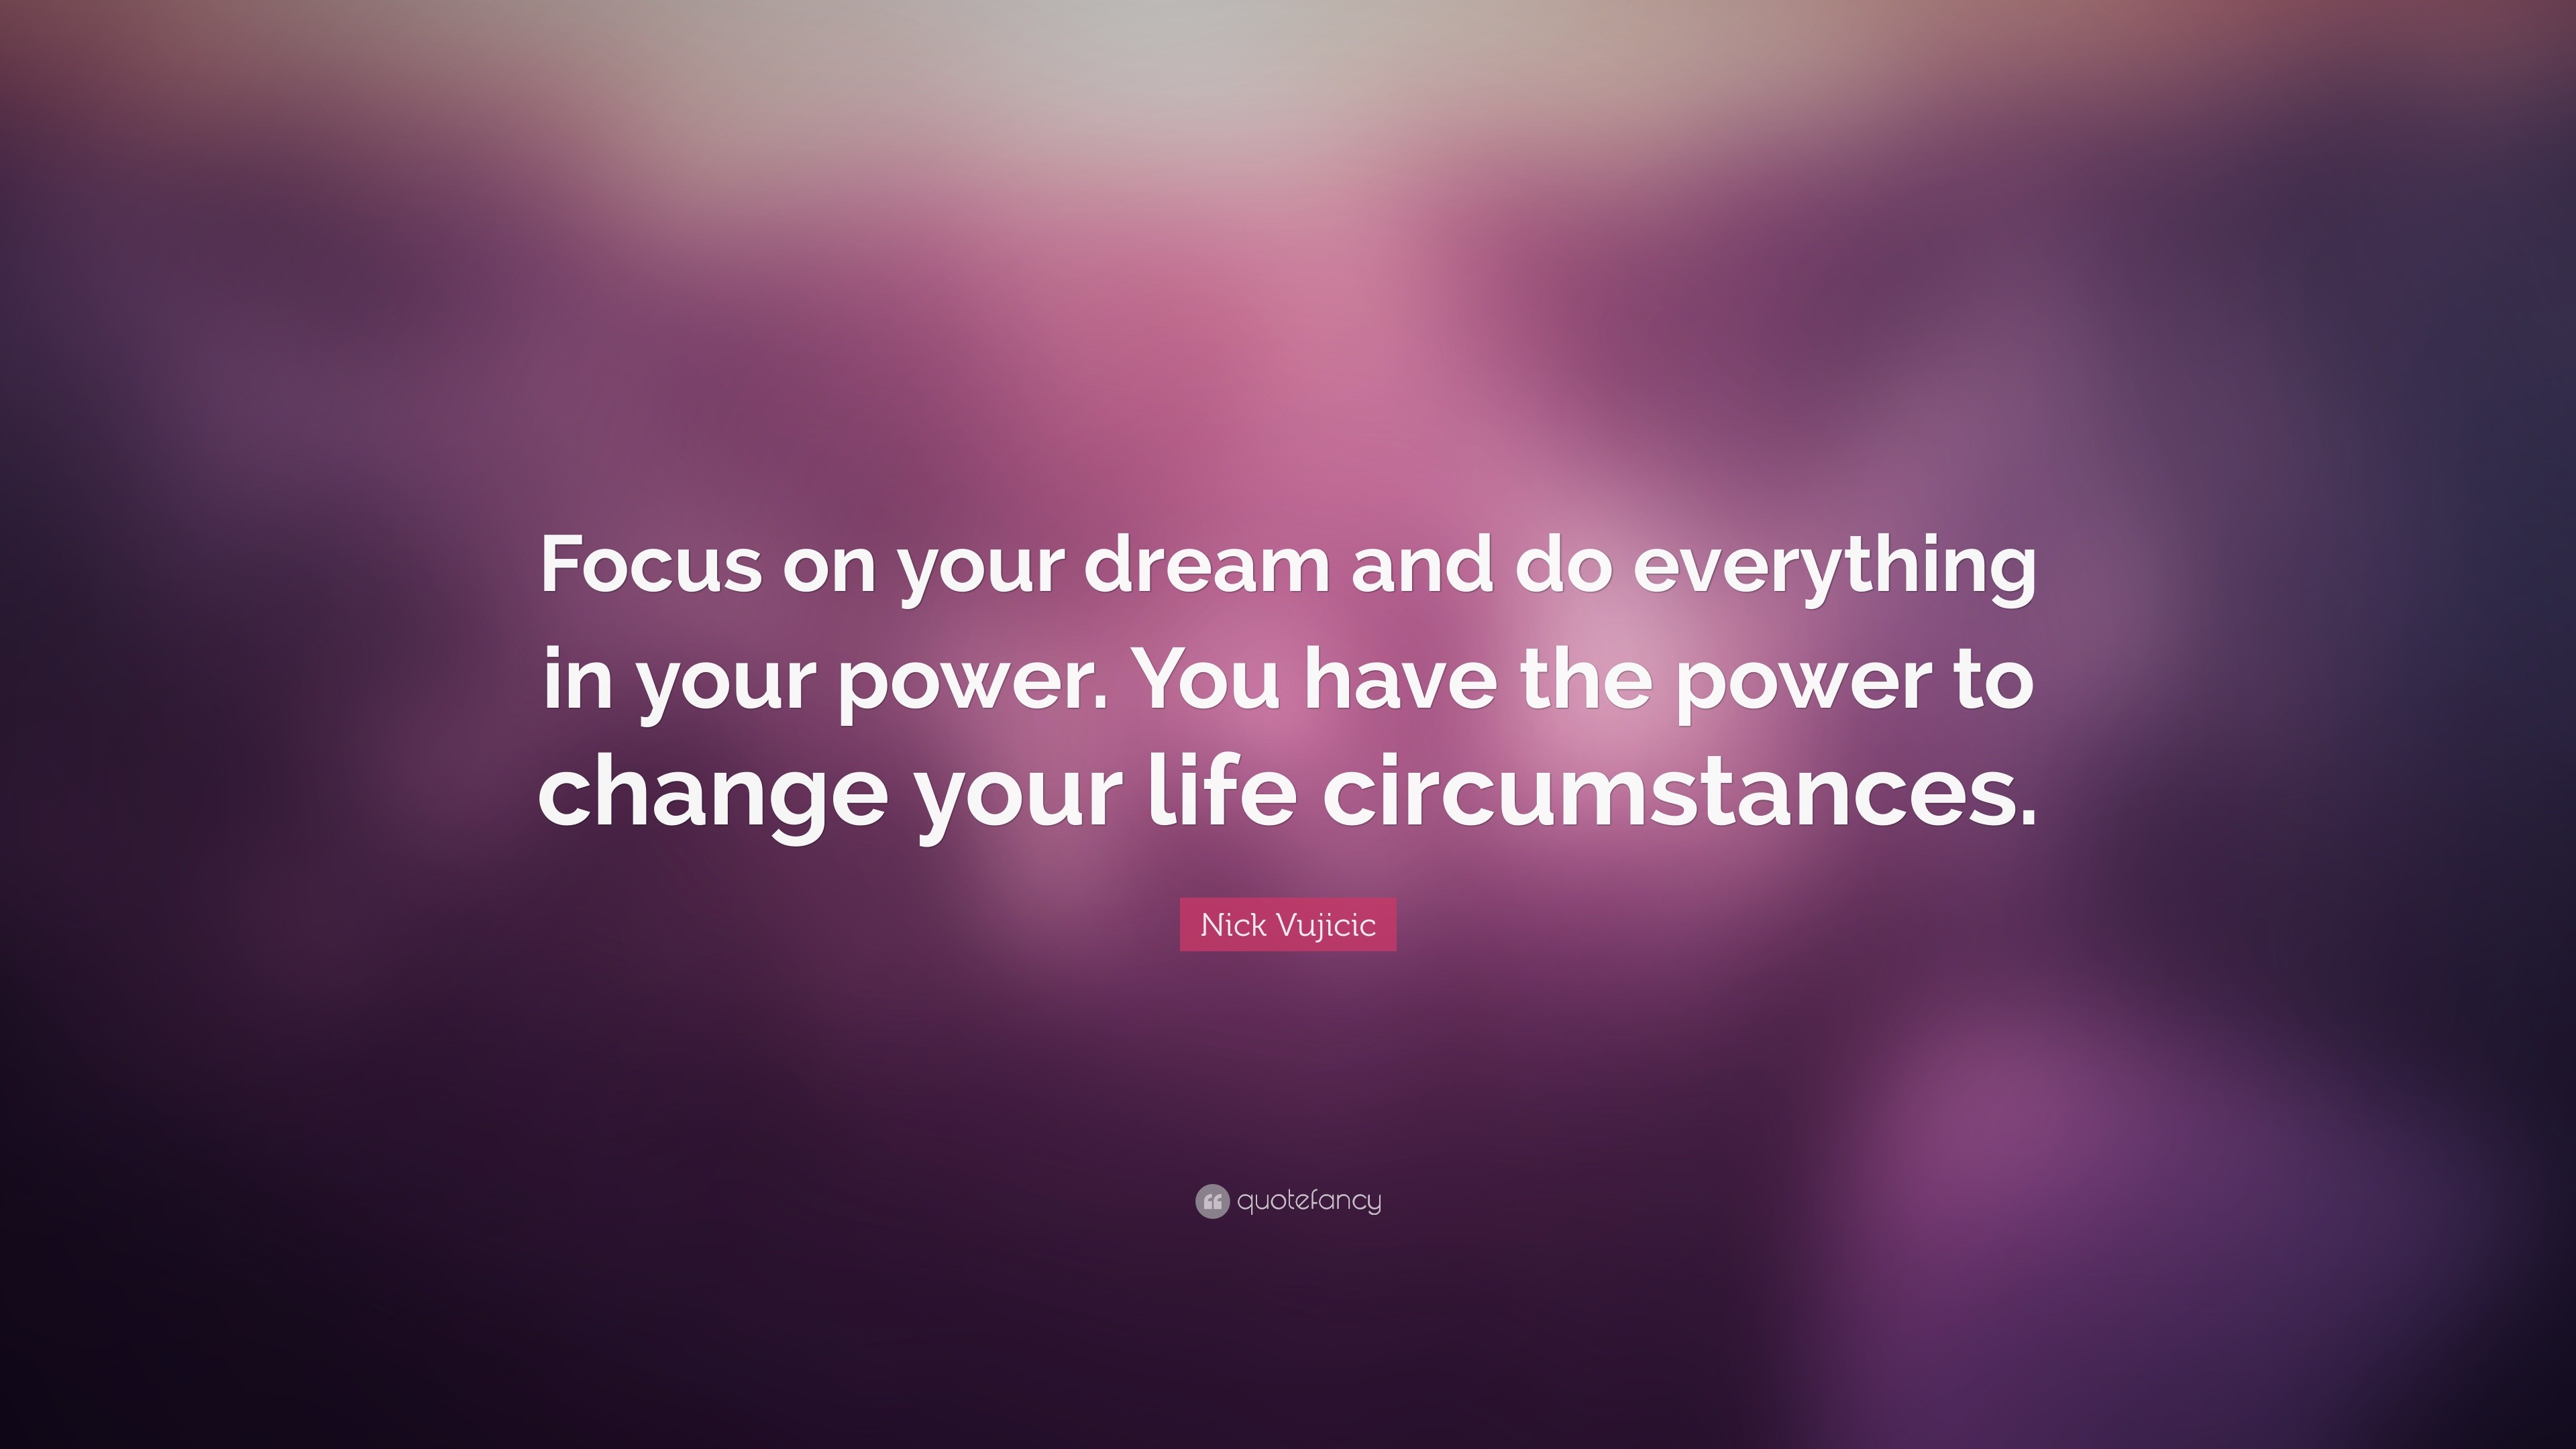 Nick Vujicic Quote “Focus on your dream and do everything in your power